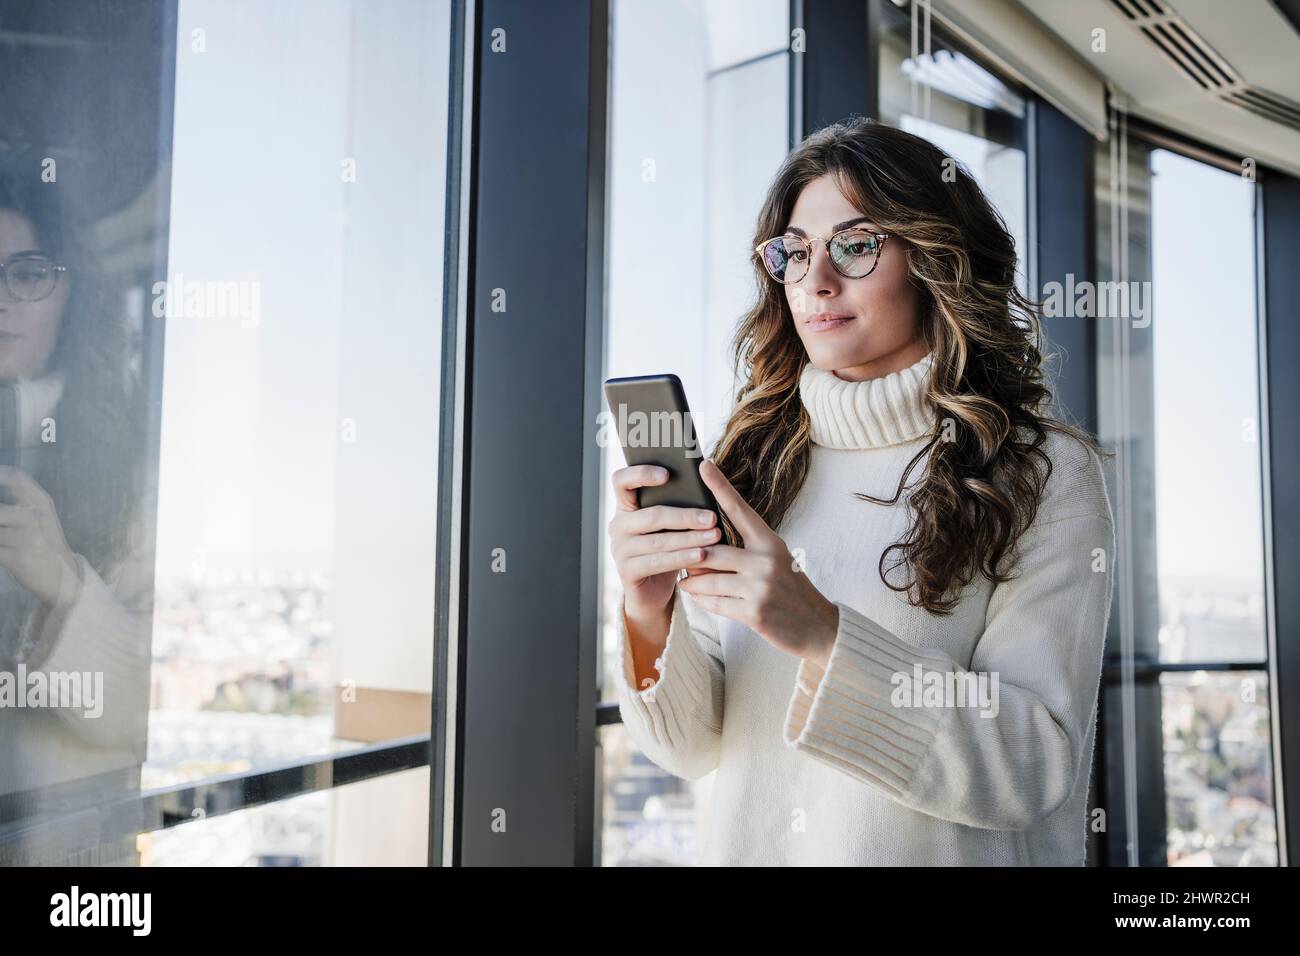 Businesswoman with wavy hair using smart phone in office Stock Photo